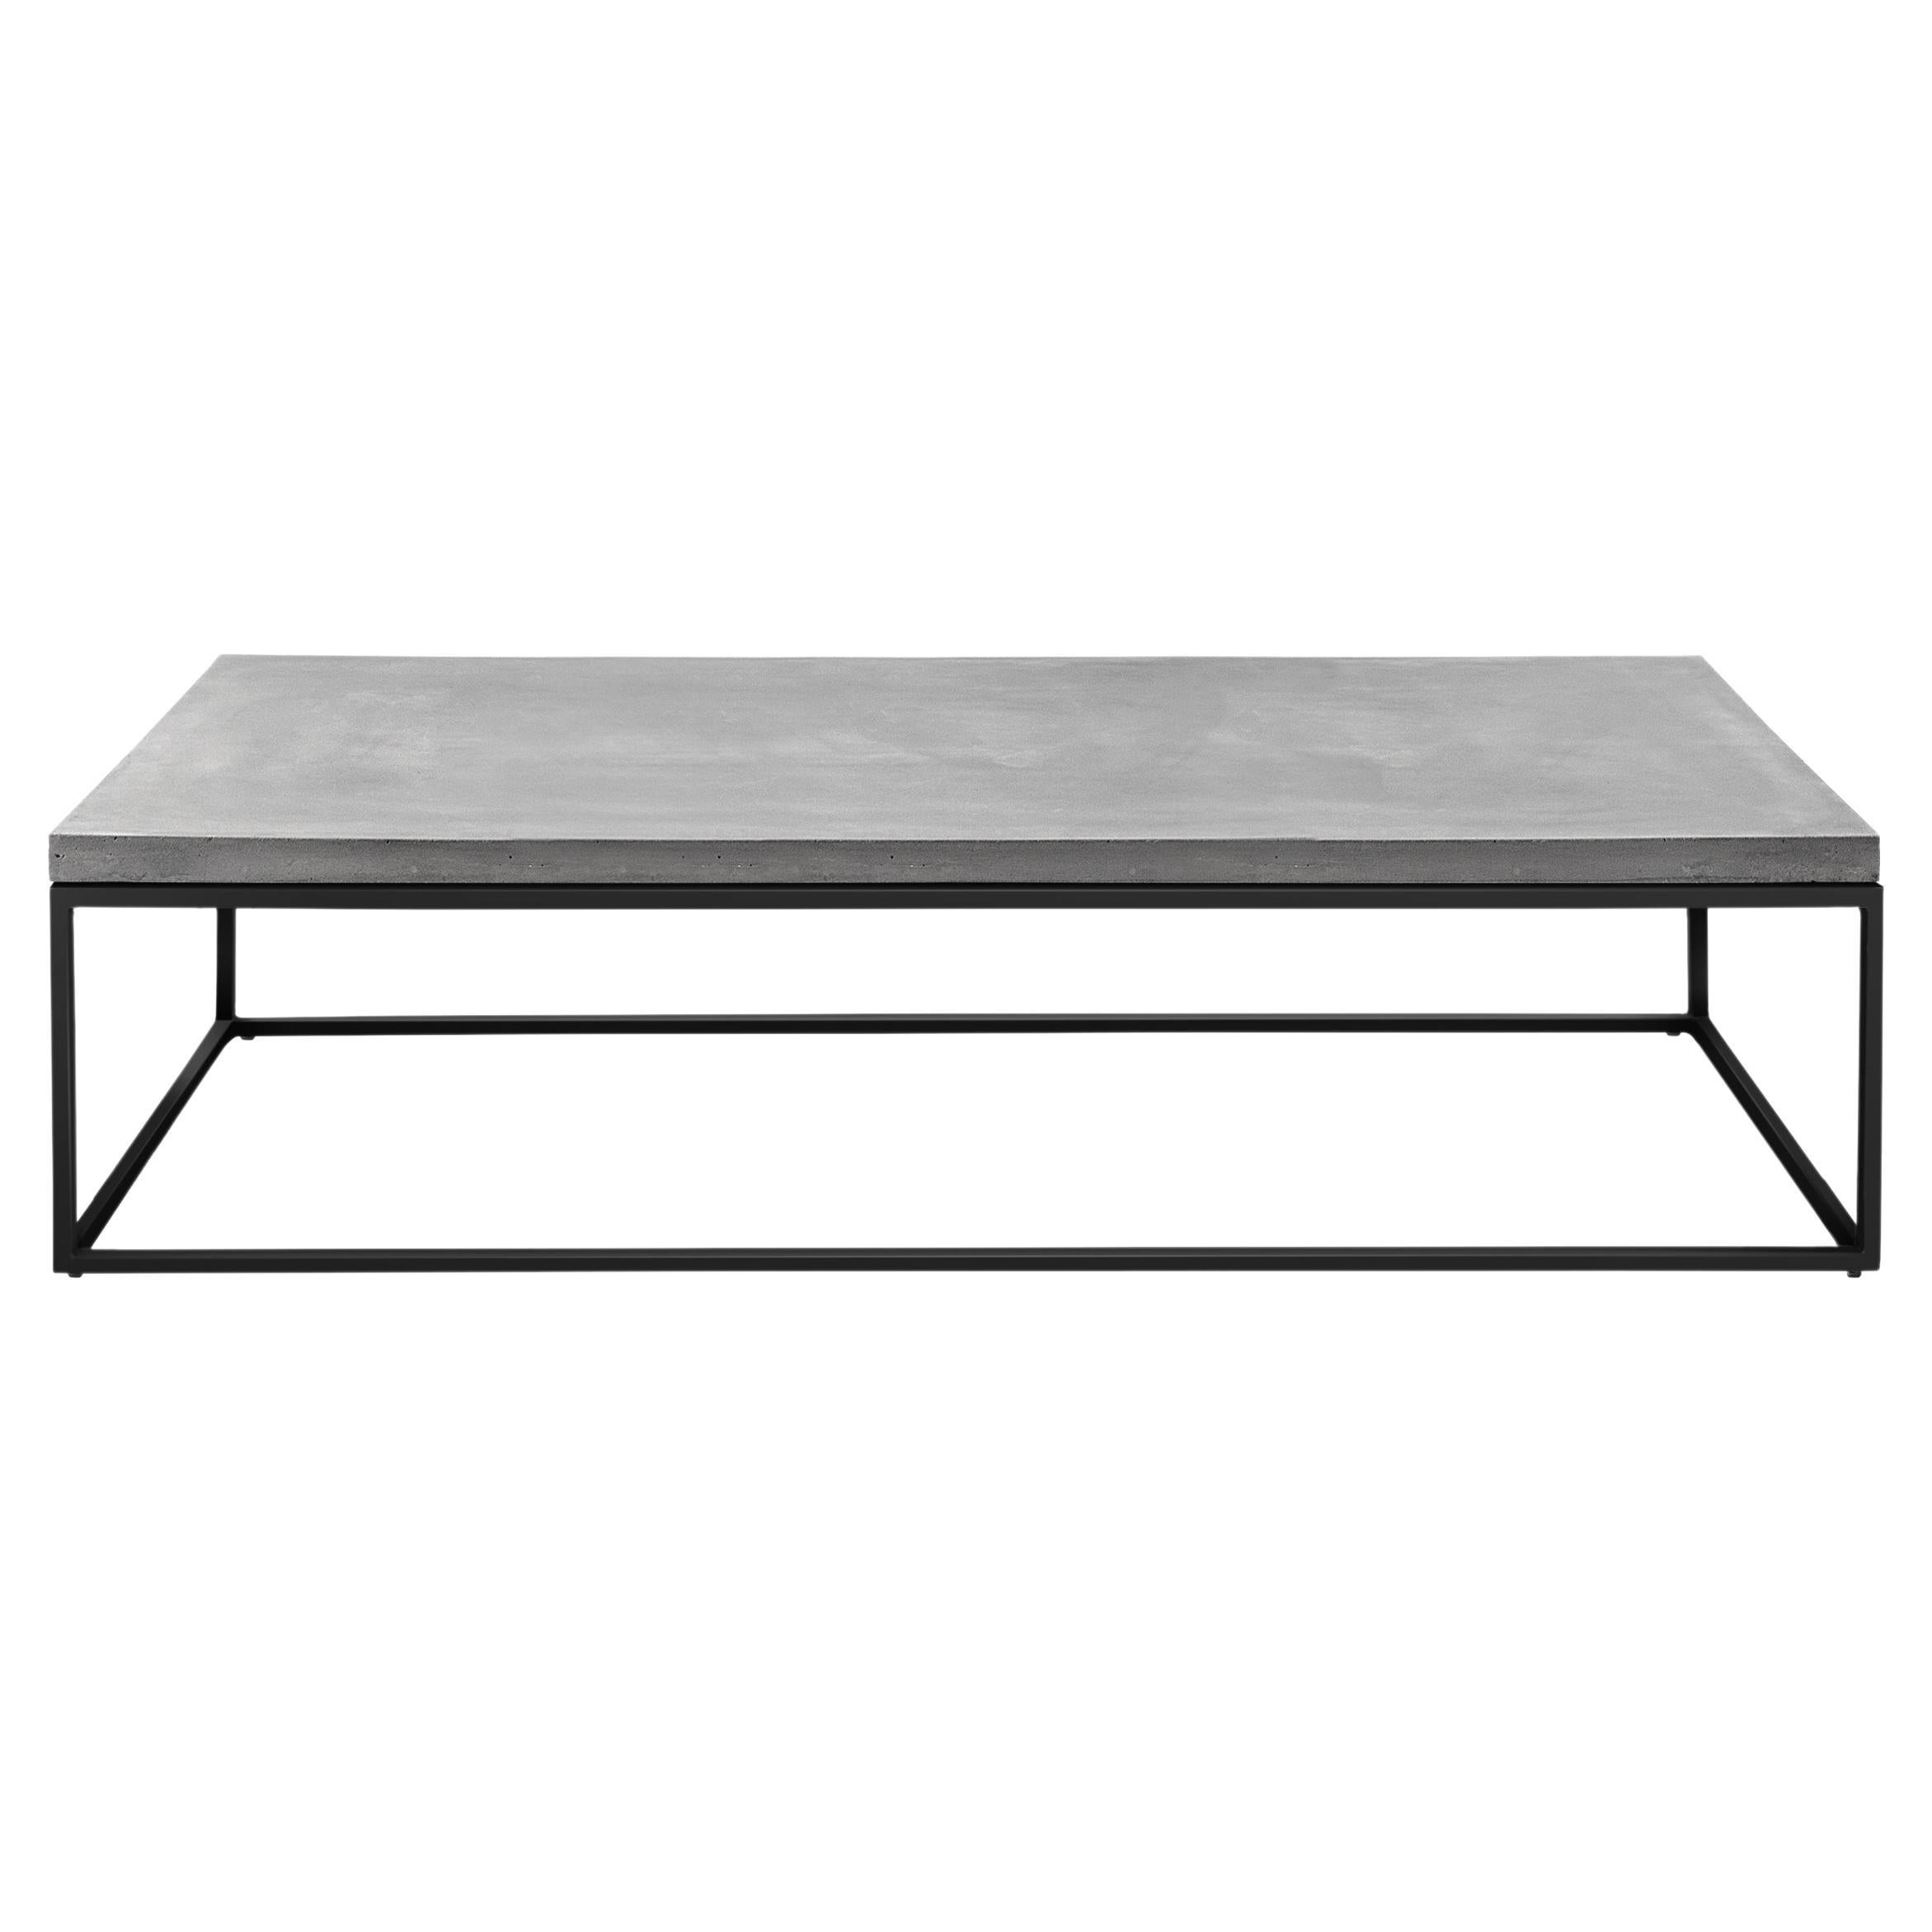 Perspective 1300x700 Coffee Table Black For Sale